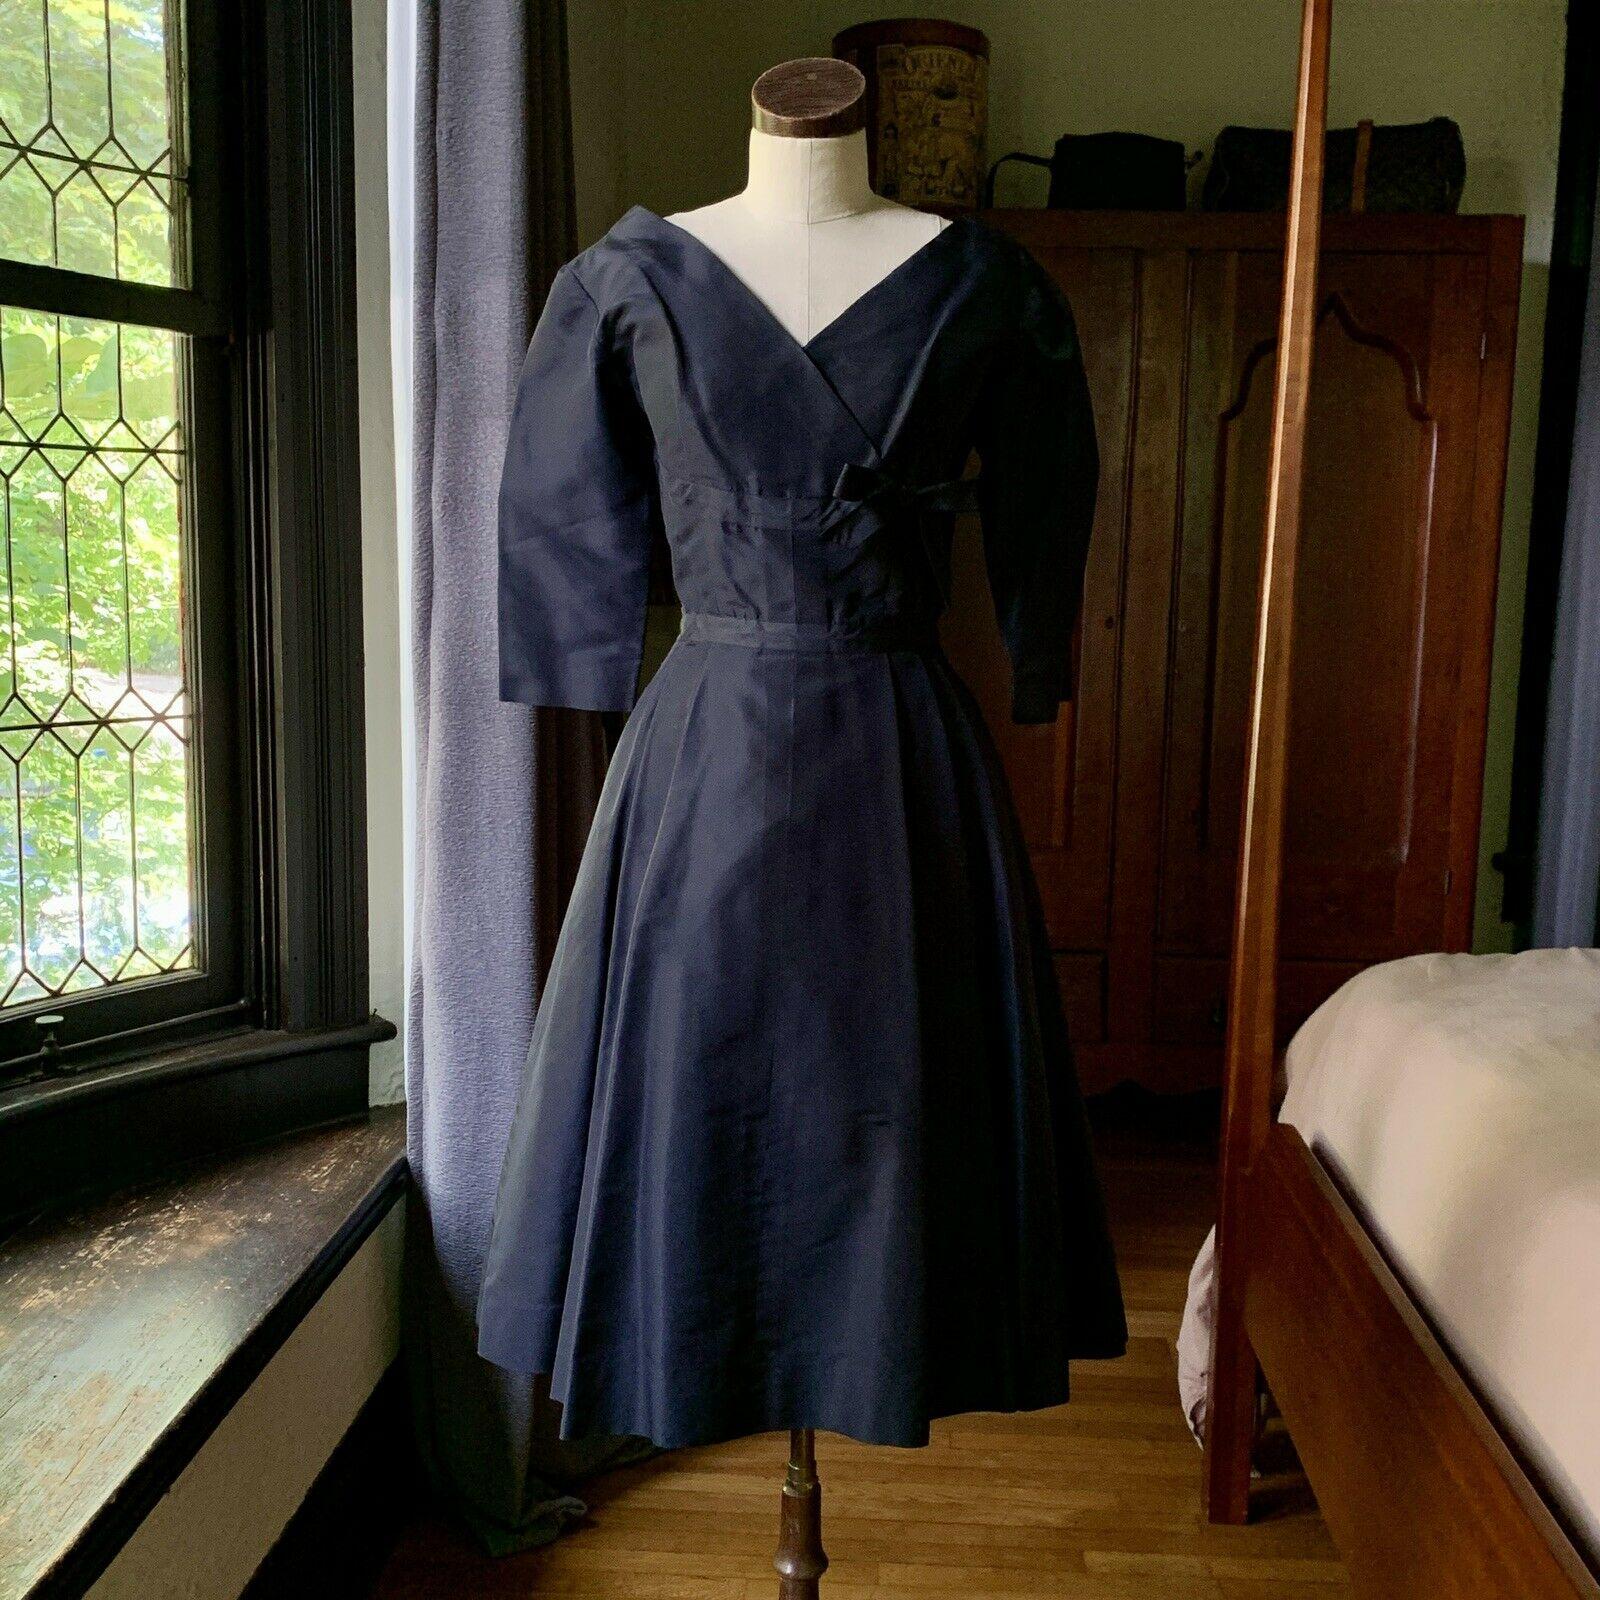 Larry Aldrich, 1950's Era Vintage Couture, Silk Taffeta, V Neck Front Wrap Style with Bow, Two Front Pockets, Nine Fabric Back Buttons, Built-in Moderate Crinoline with Hook and Eye Closures

Measurements Laying Flat

Bust 18